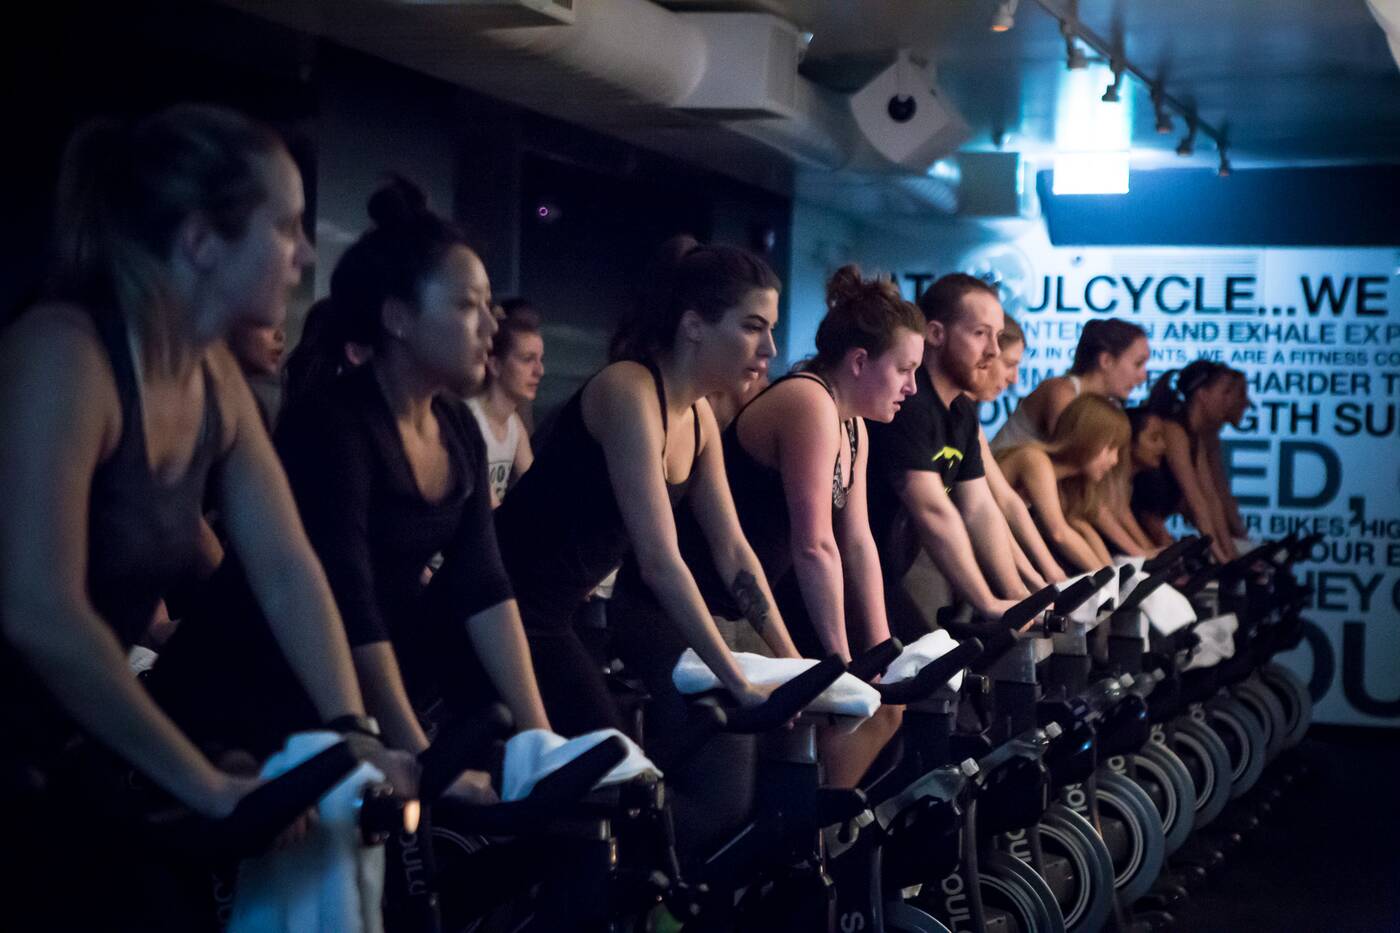 soulcycle toronto